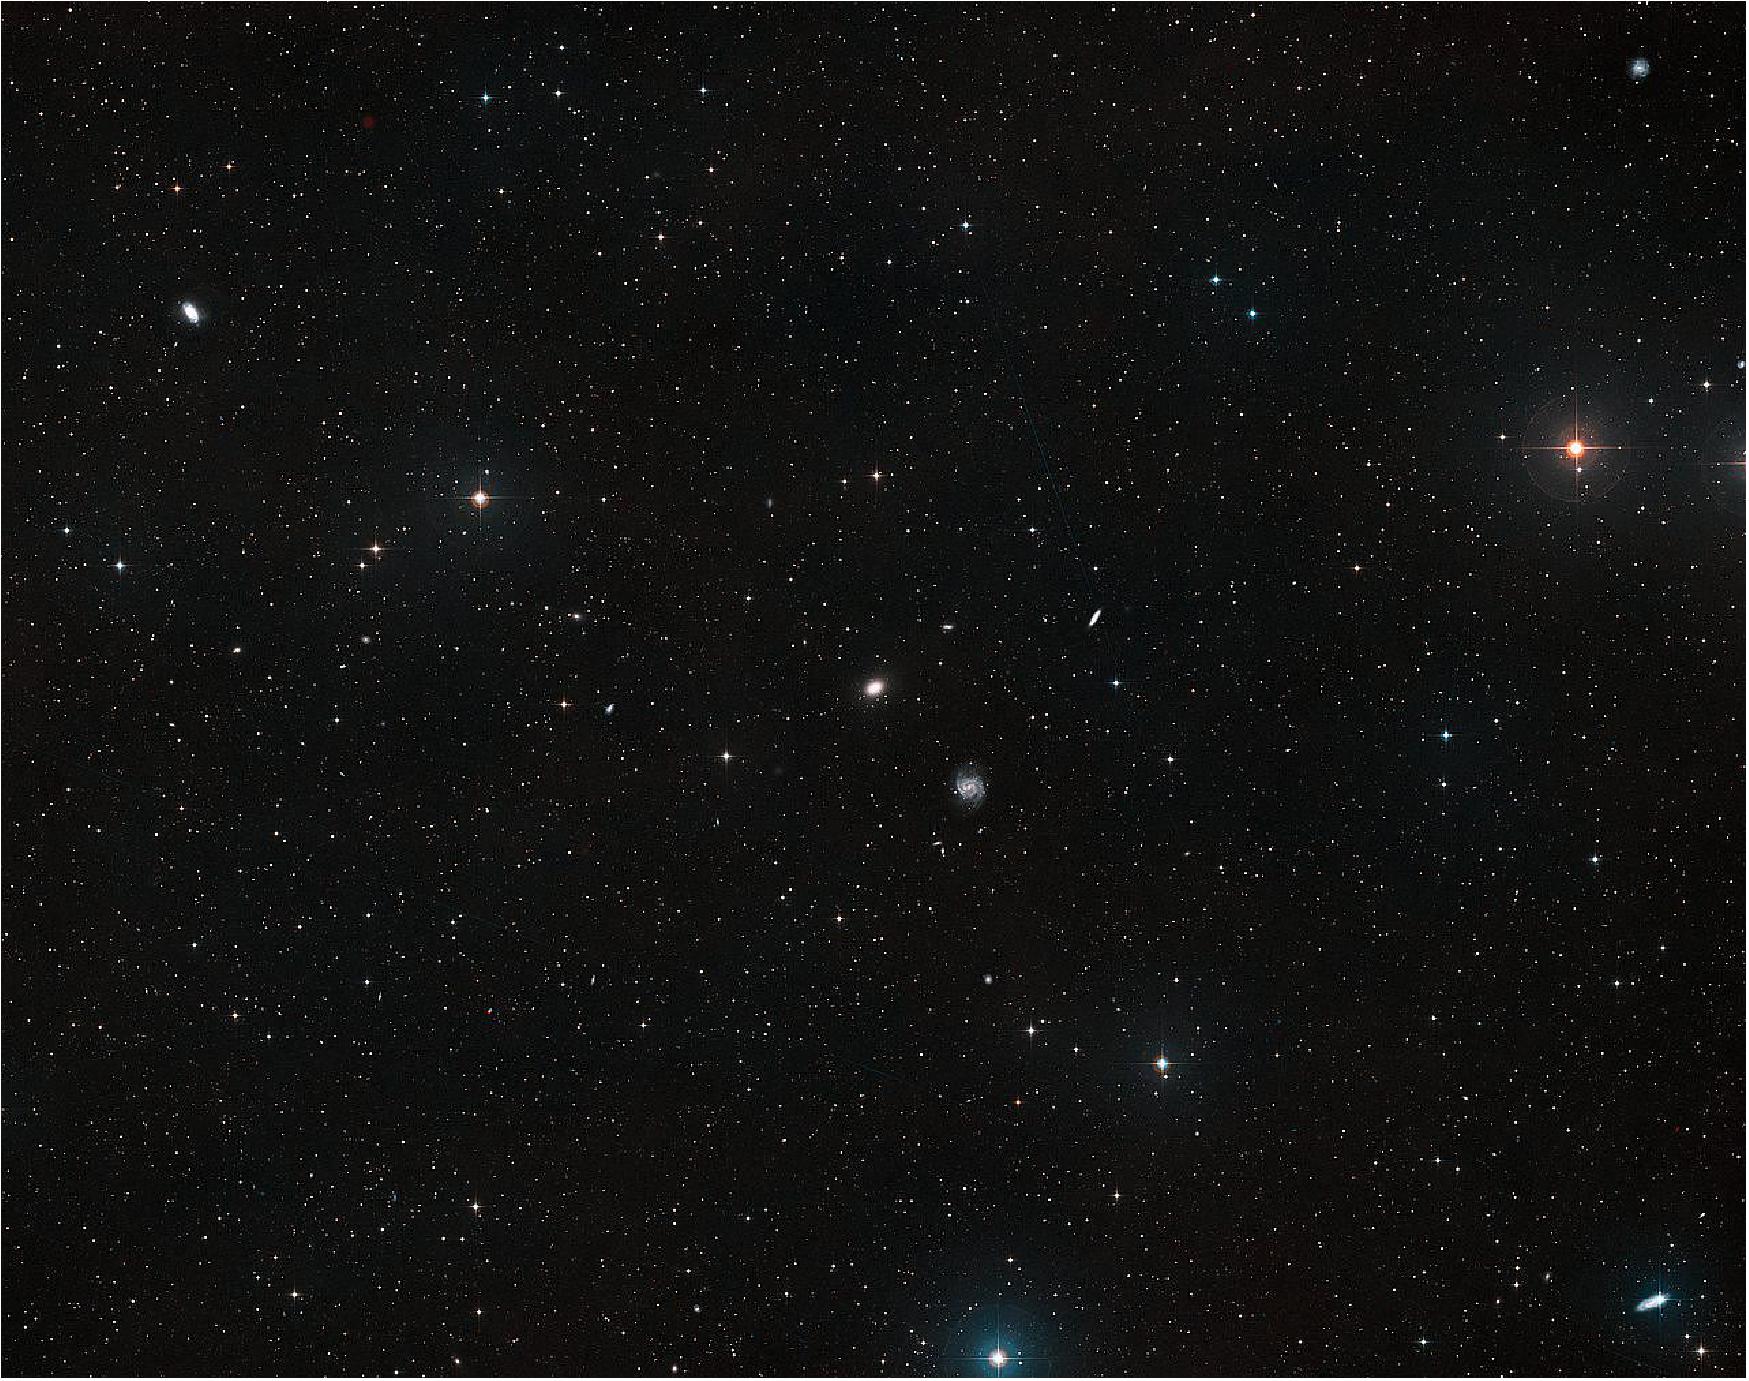 Figure 9: Ground-based view of the sky around the galaxies NGC 1052-DF4 NGC & 1052-DF2. This image shows the sky around the ultra diffuse galaxies NGC 1052-DF4 and NGC 1052-DF2. It was created from images forming part of the Digitized Sky Survey 2. NGC 1052-DF2 is basically invisible in this image (image credit: ESA/Hubble, NASA, Digitized Sky Survey 2, Acknowledgement: Davide de Martin)